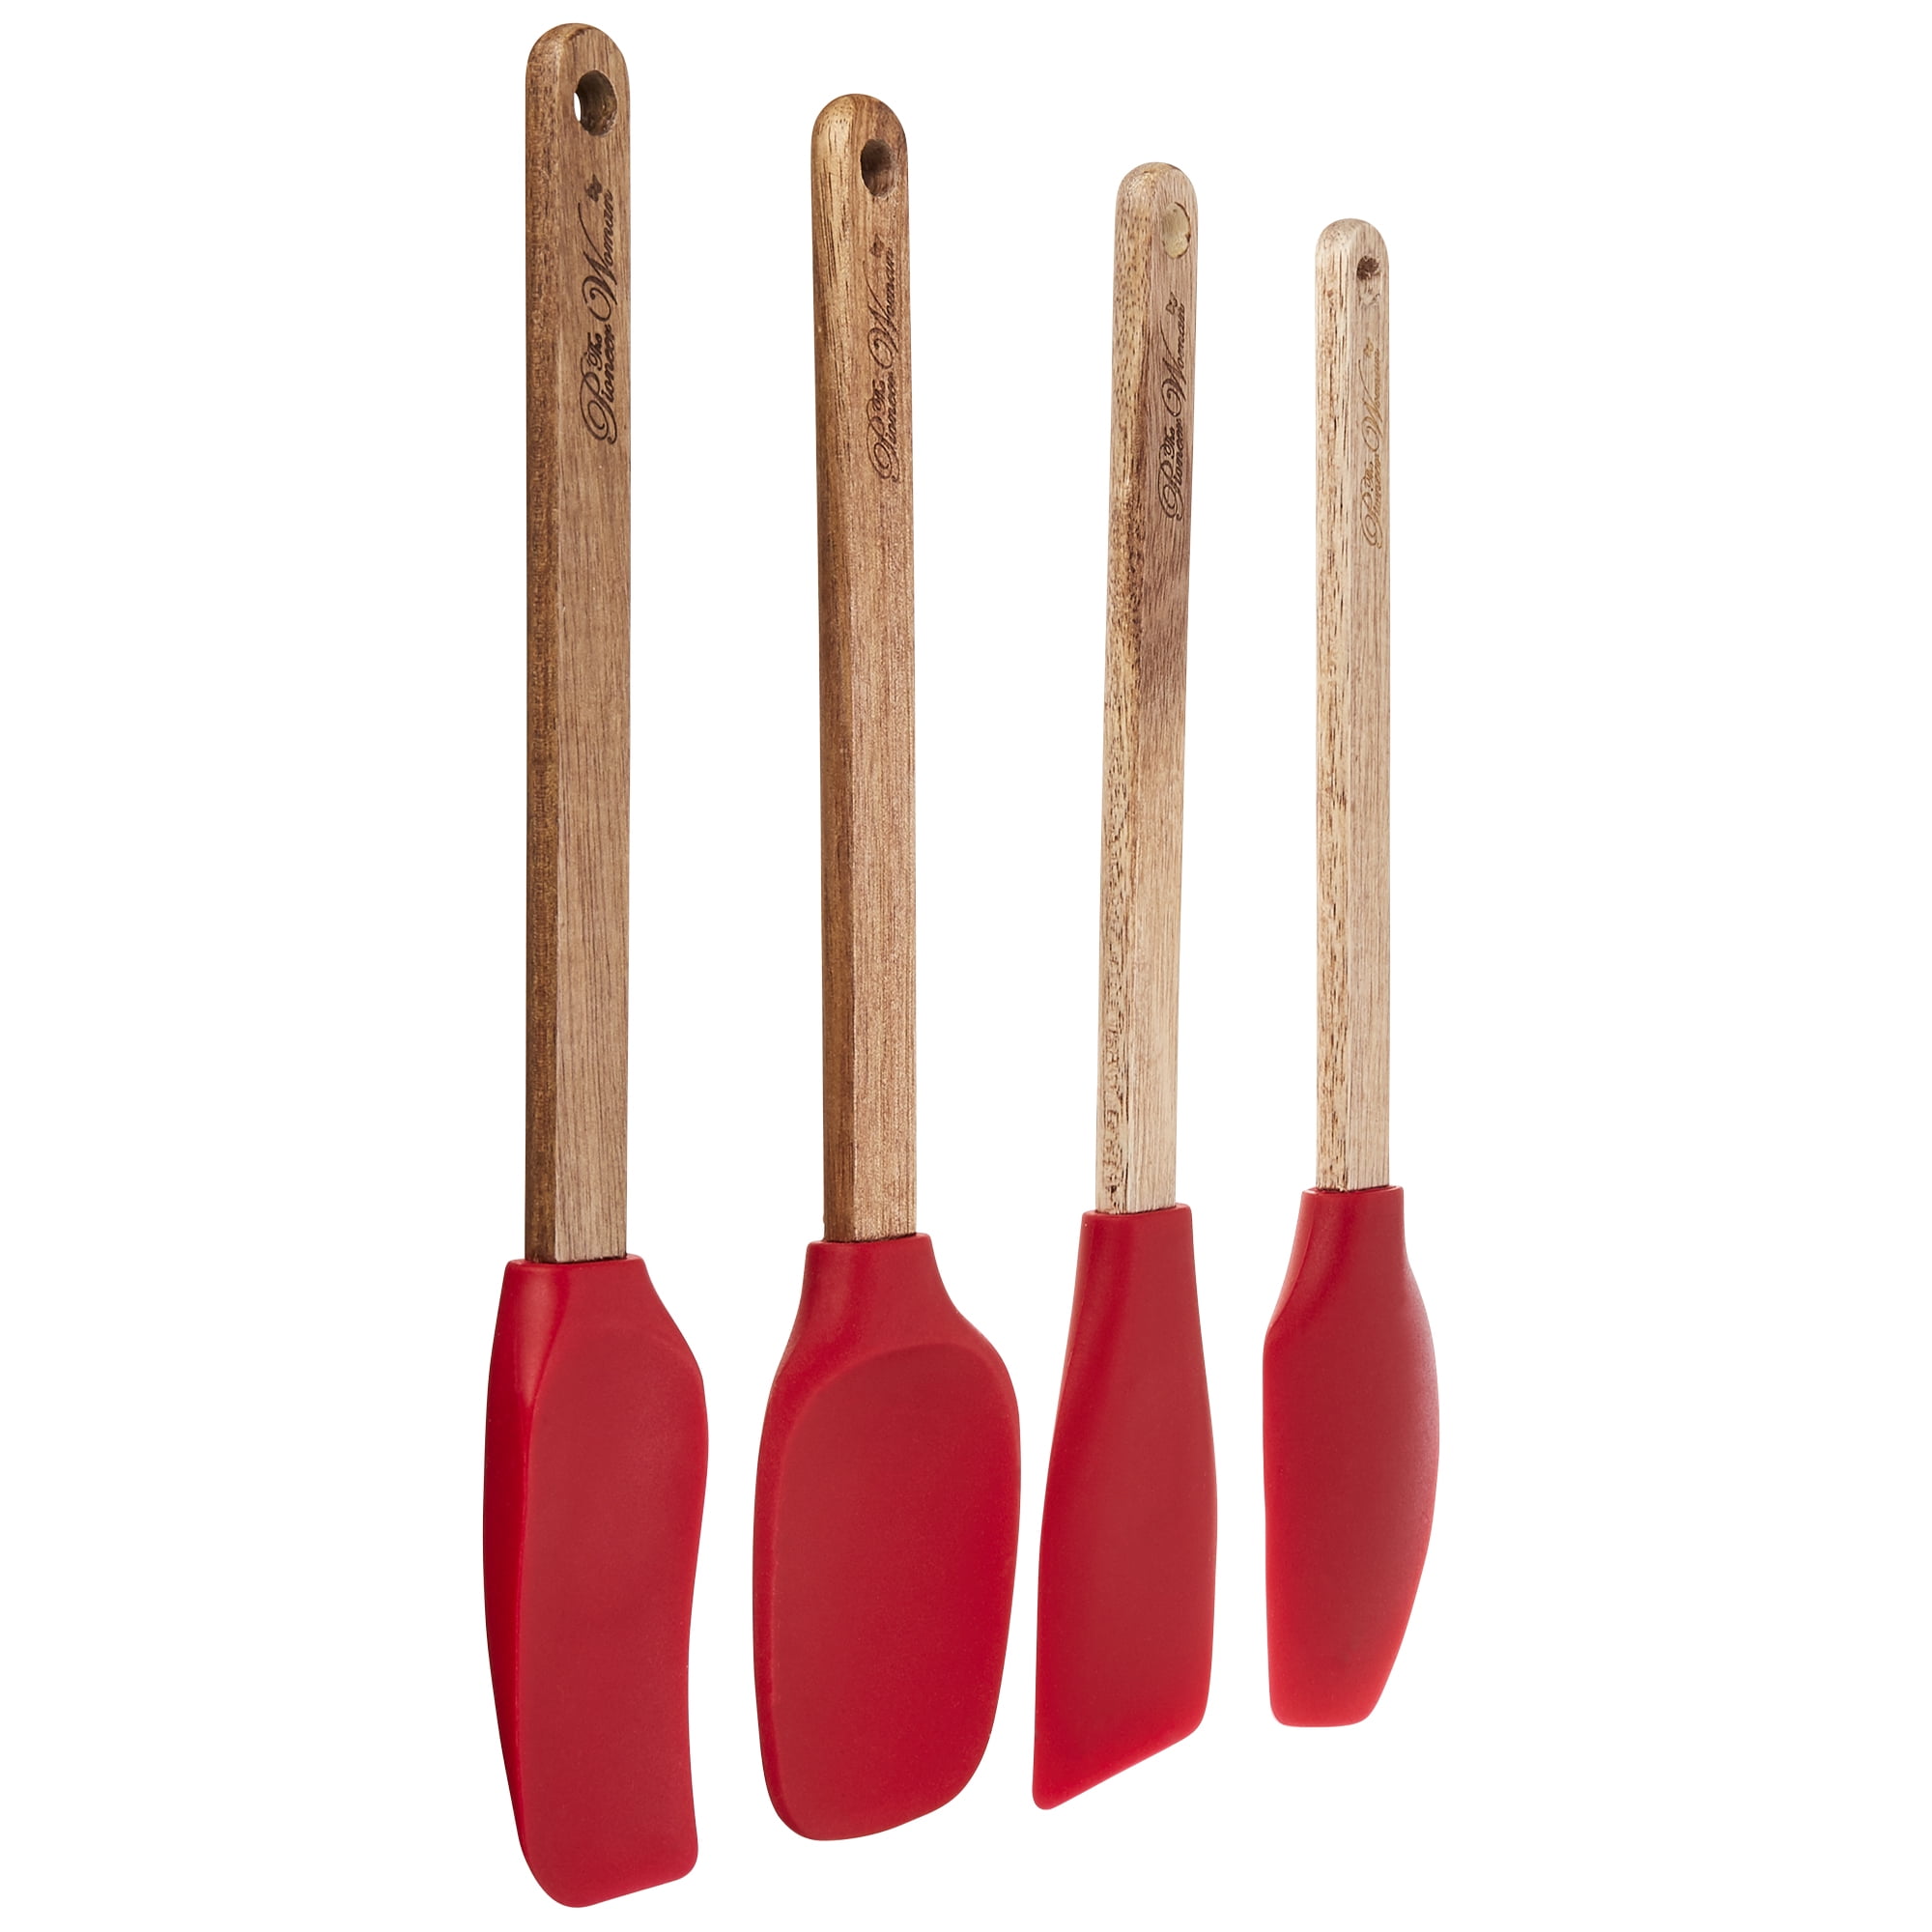 4-Piece Silicone Utensil Set in Red by Sur La Table - FabFitFun